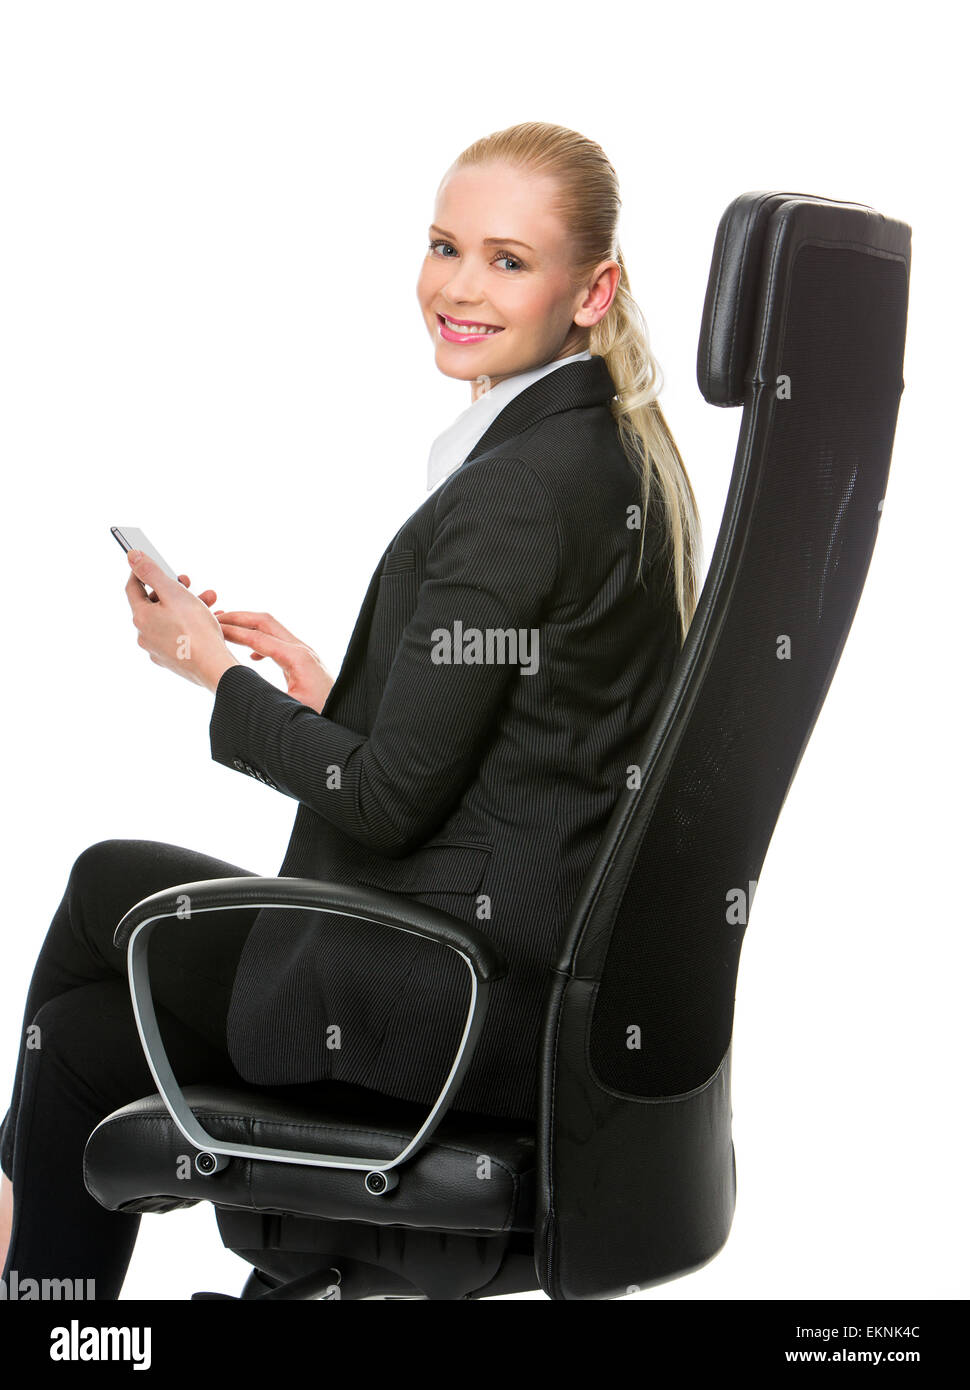 blonde smiling businesswoman seated on a chair working with tablet Stock Photo